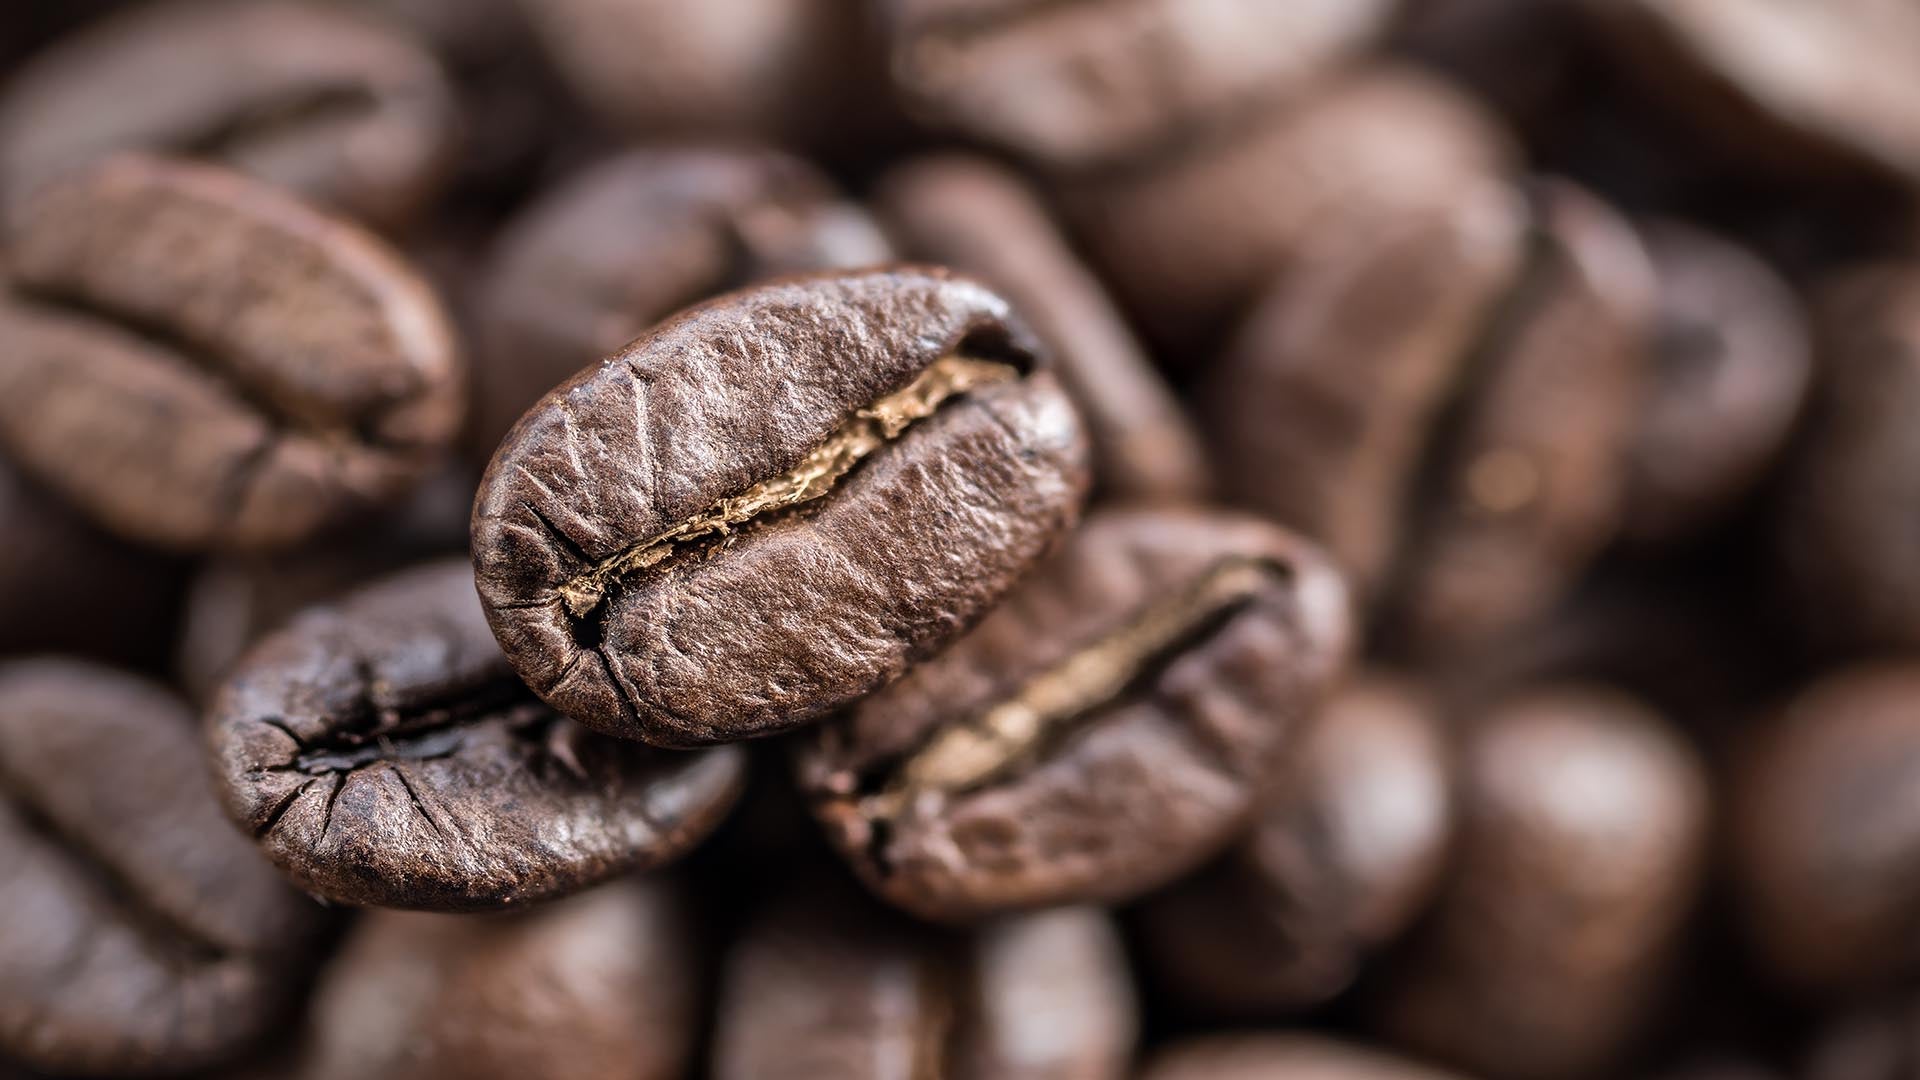 Flavorful Science: <br> What Makes Your Coffee Taste so Amazing